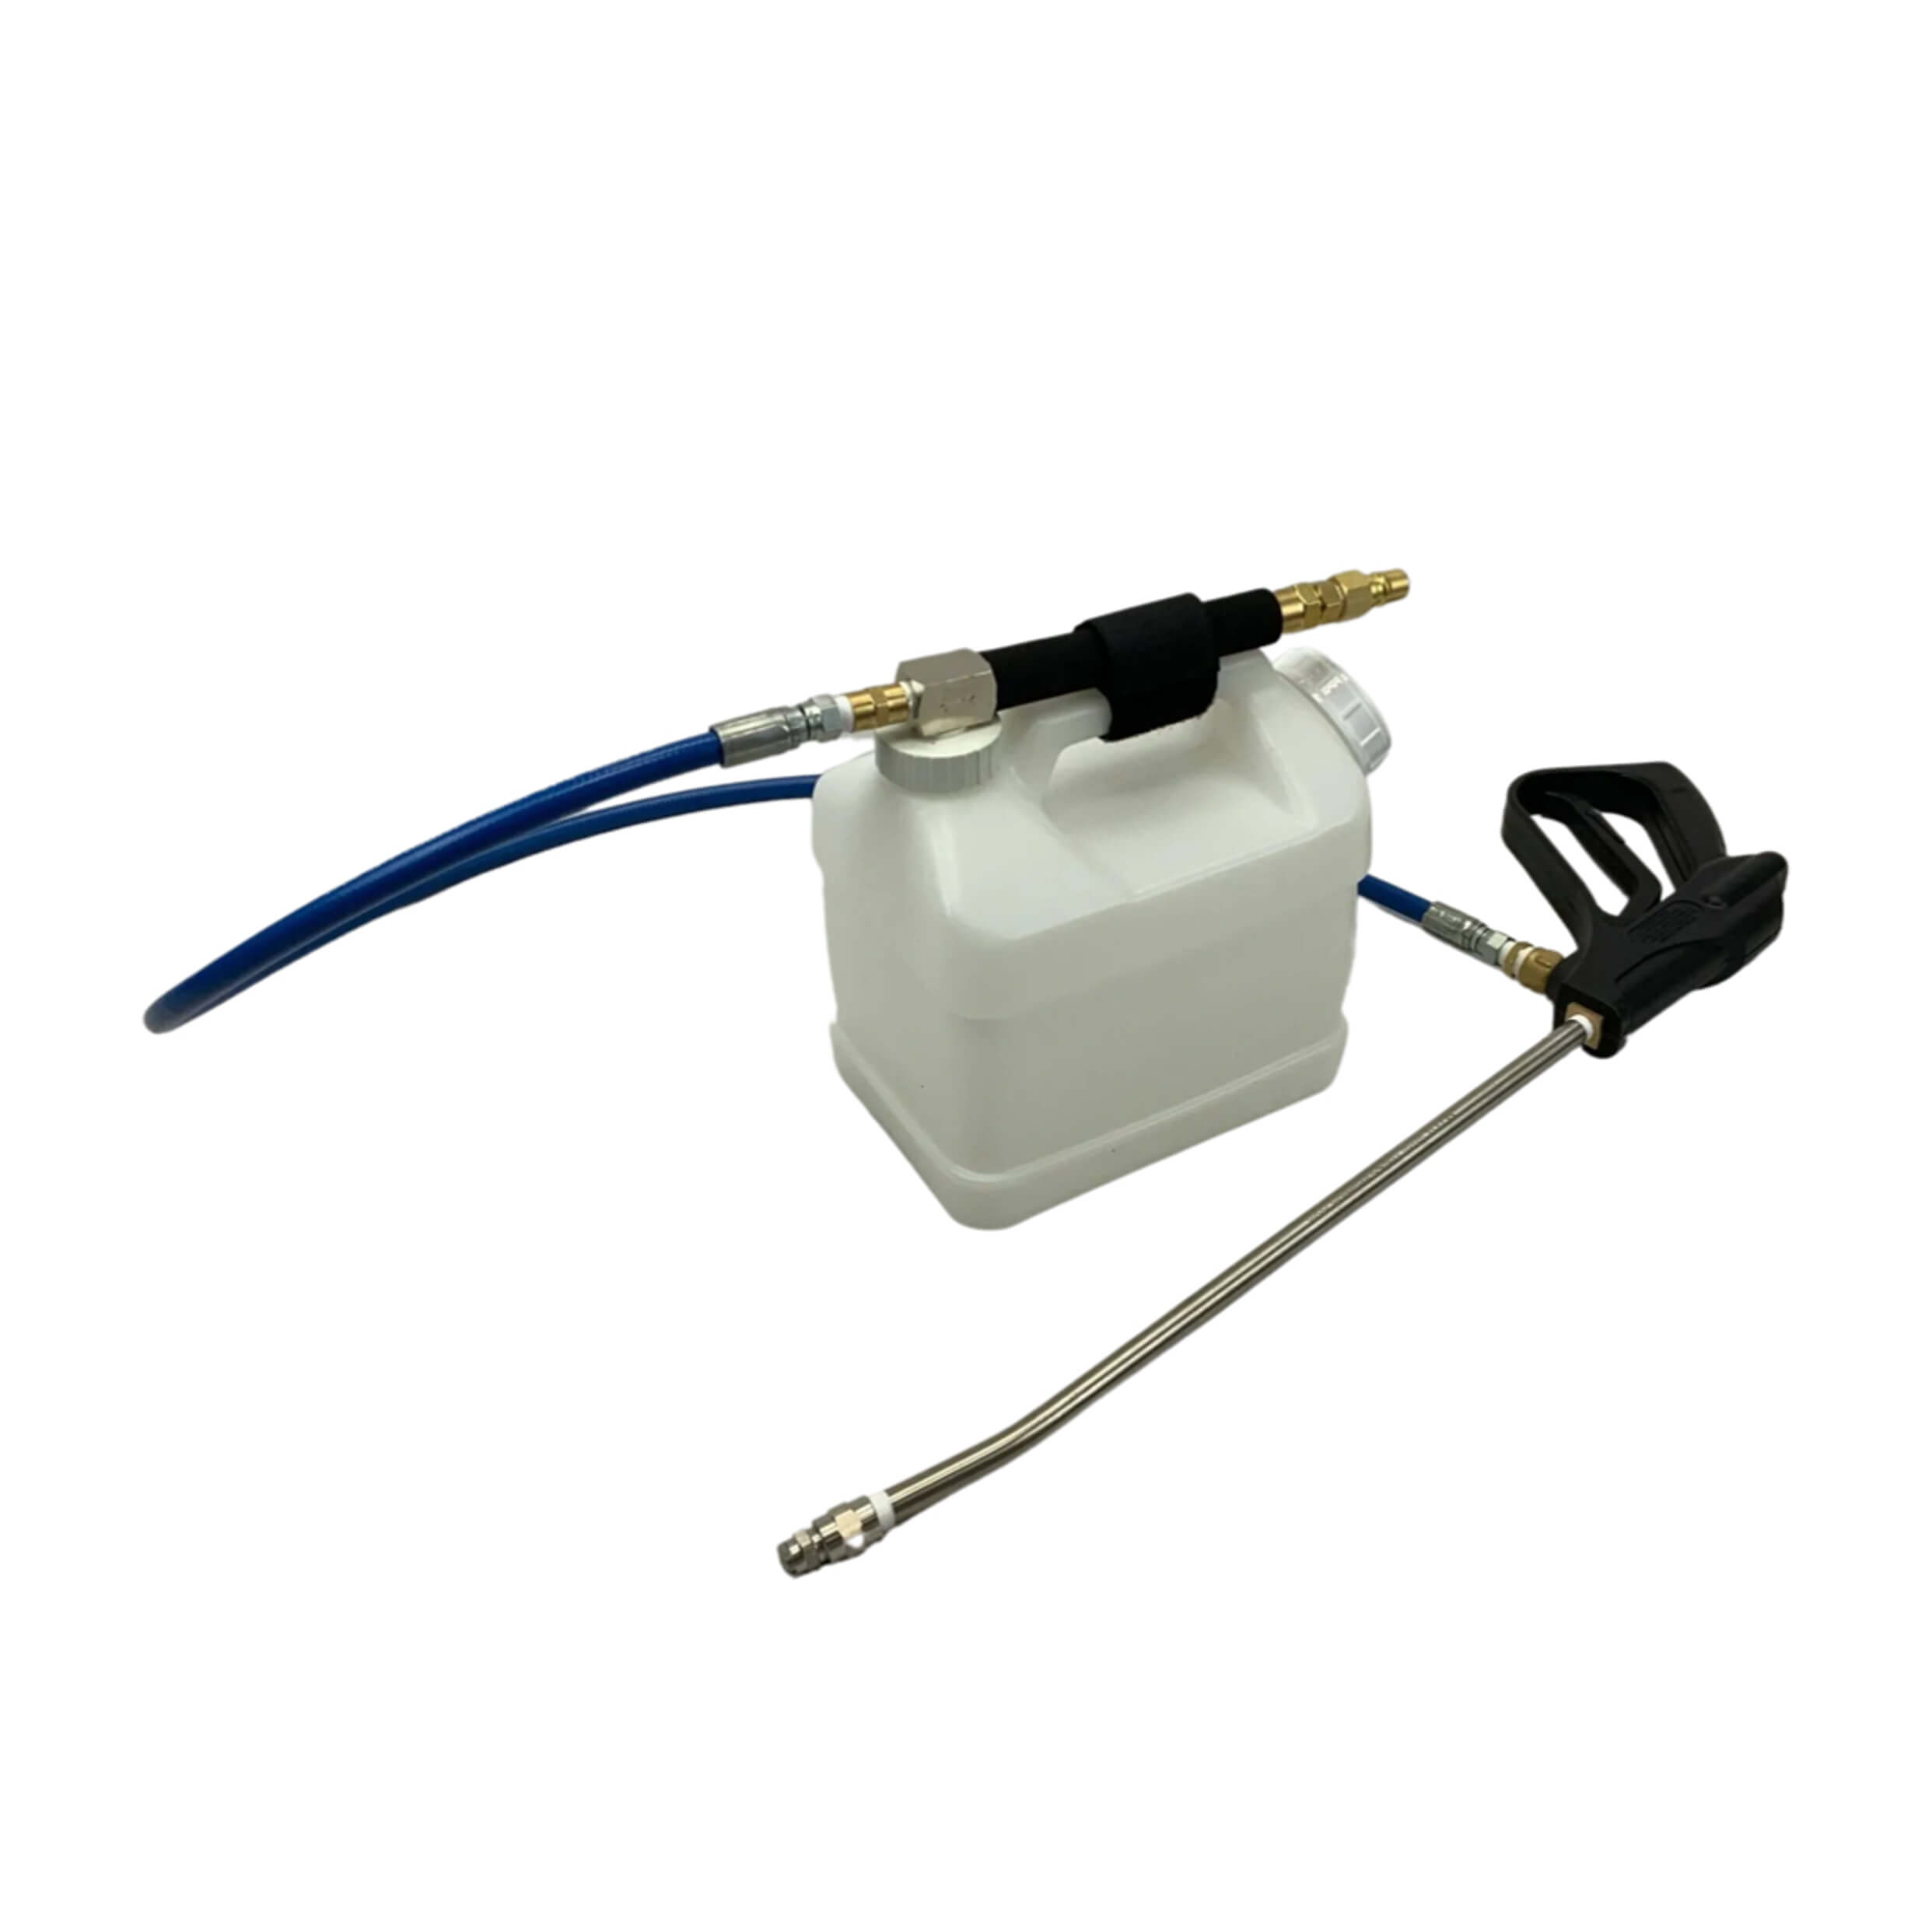 StainOut System Big Mouth High Heat Injection Sprayer 18 x 9 x 9 in. SOS-71-502